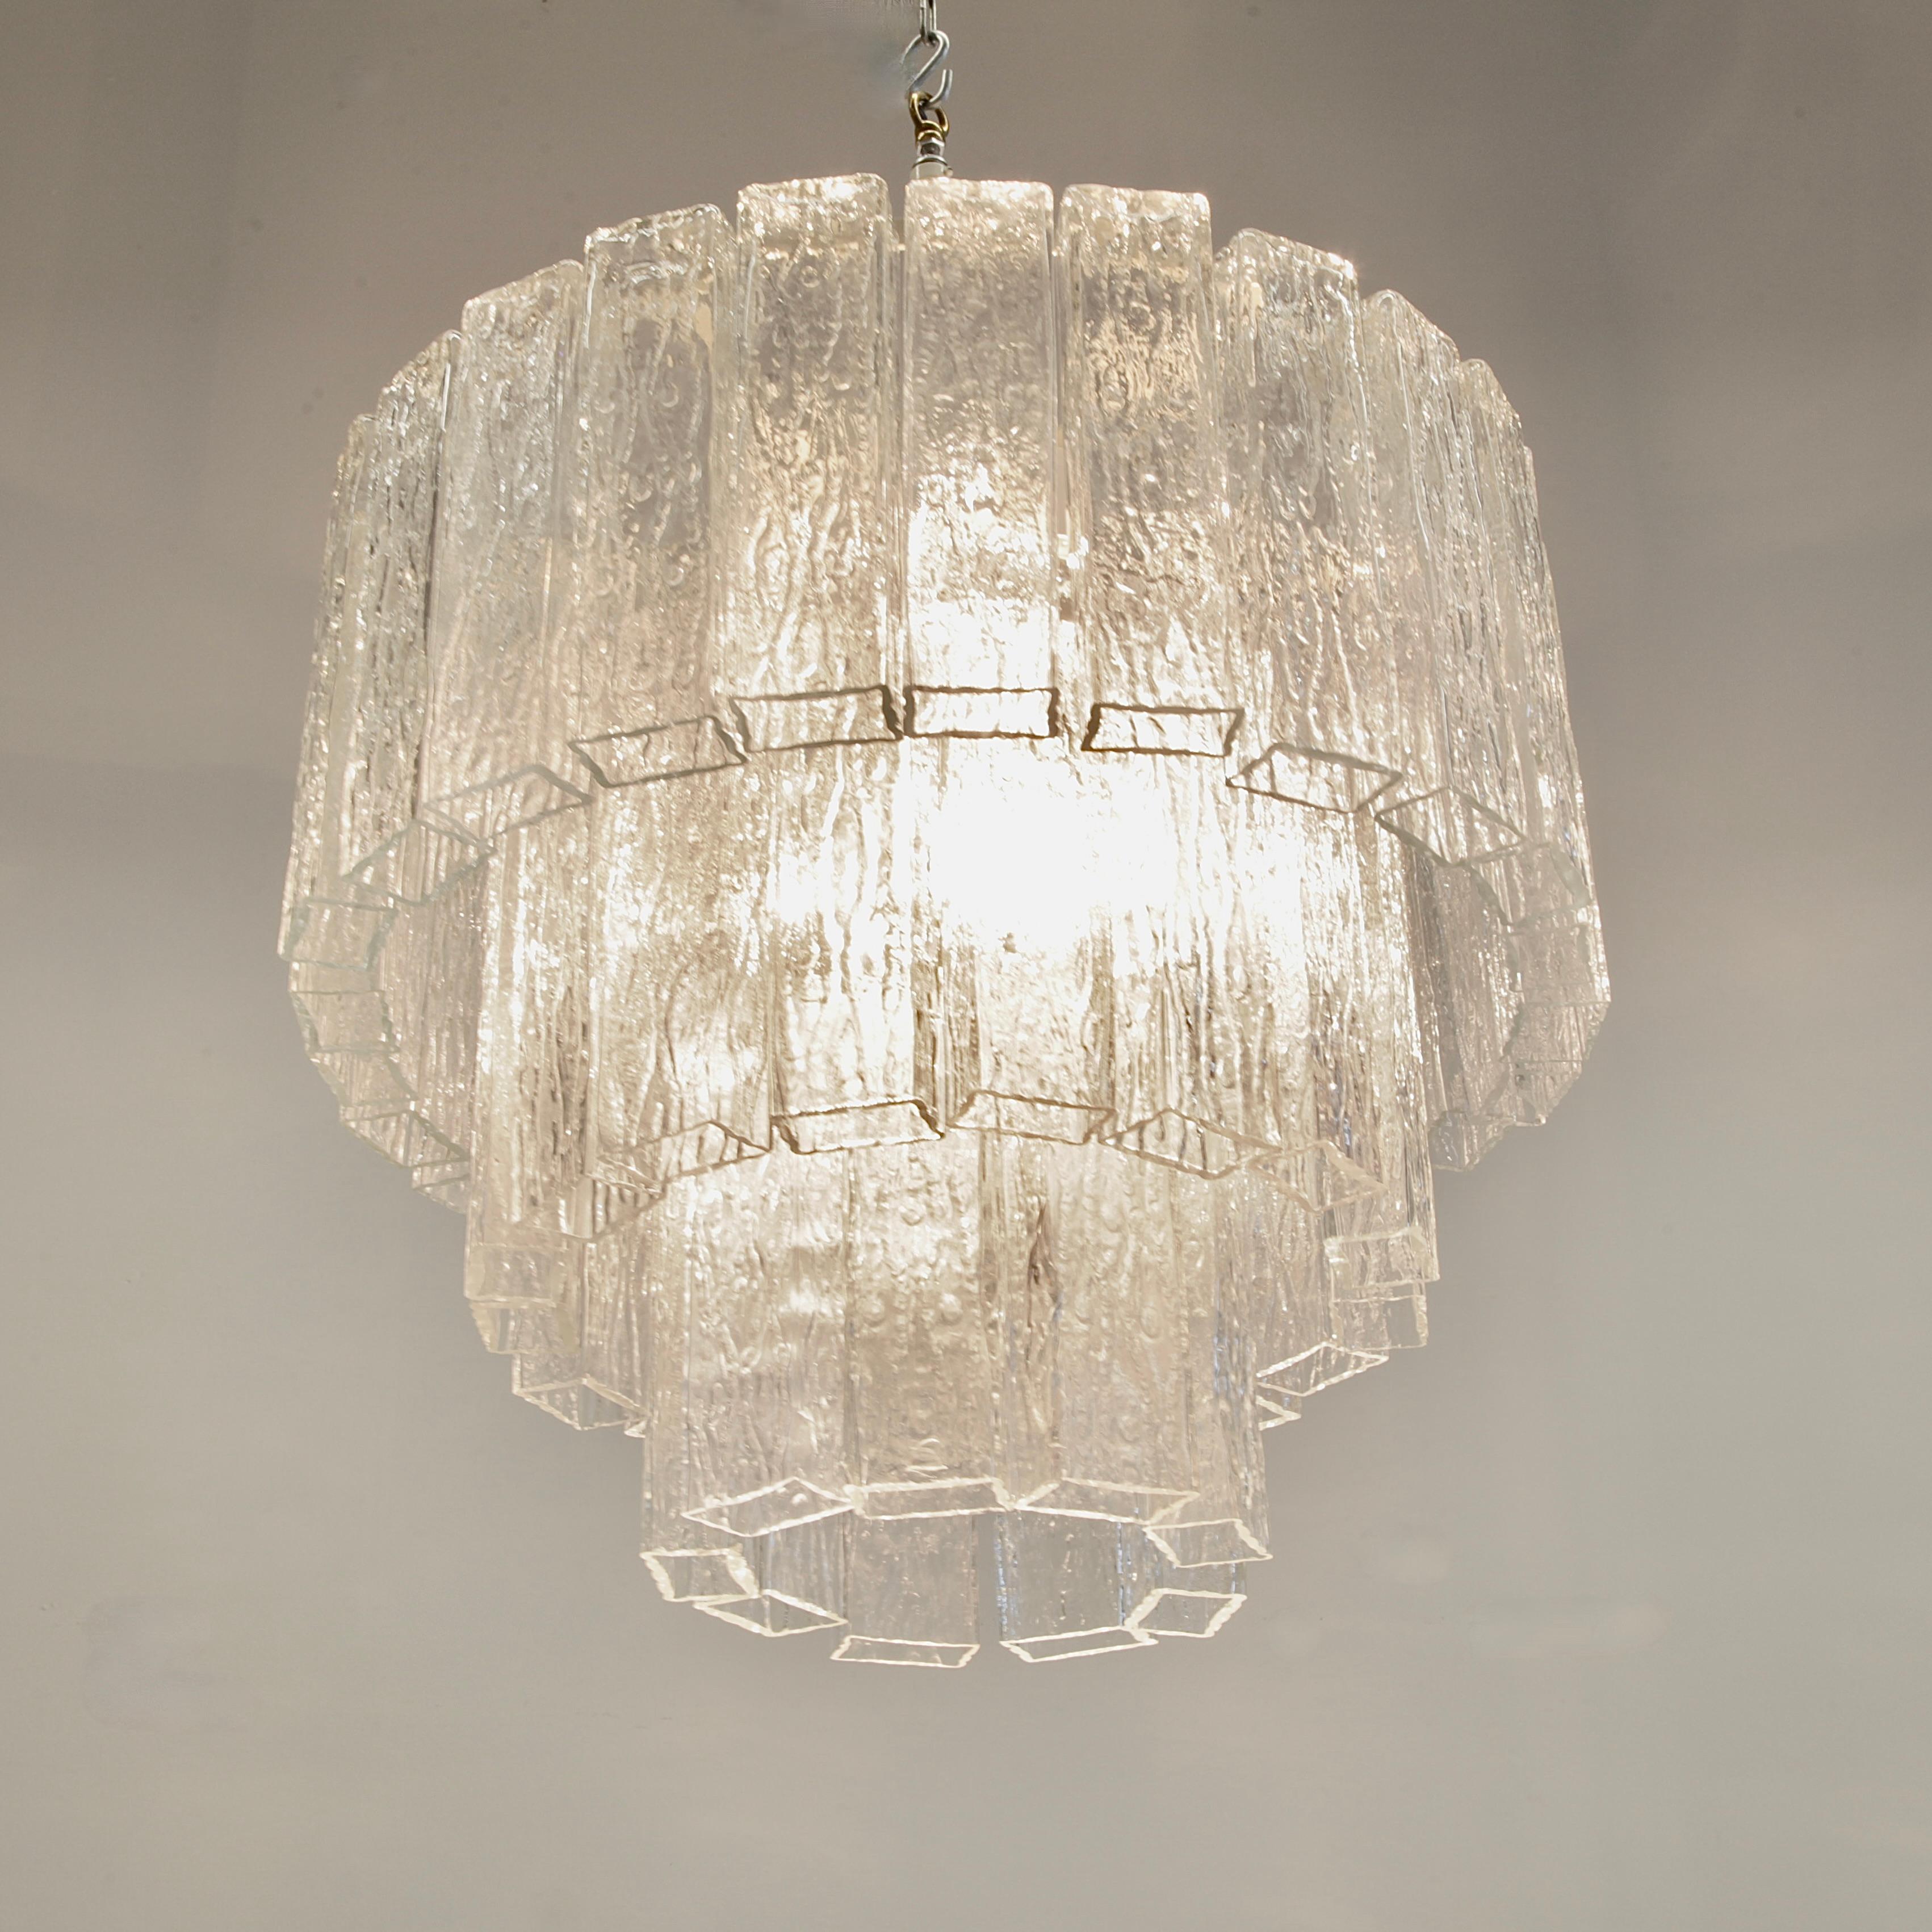 Mid-20th Century Vintage MURANO Glass Chandelier by Fratelli TOSO. Italy 1960s For Sale